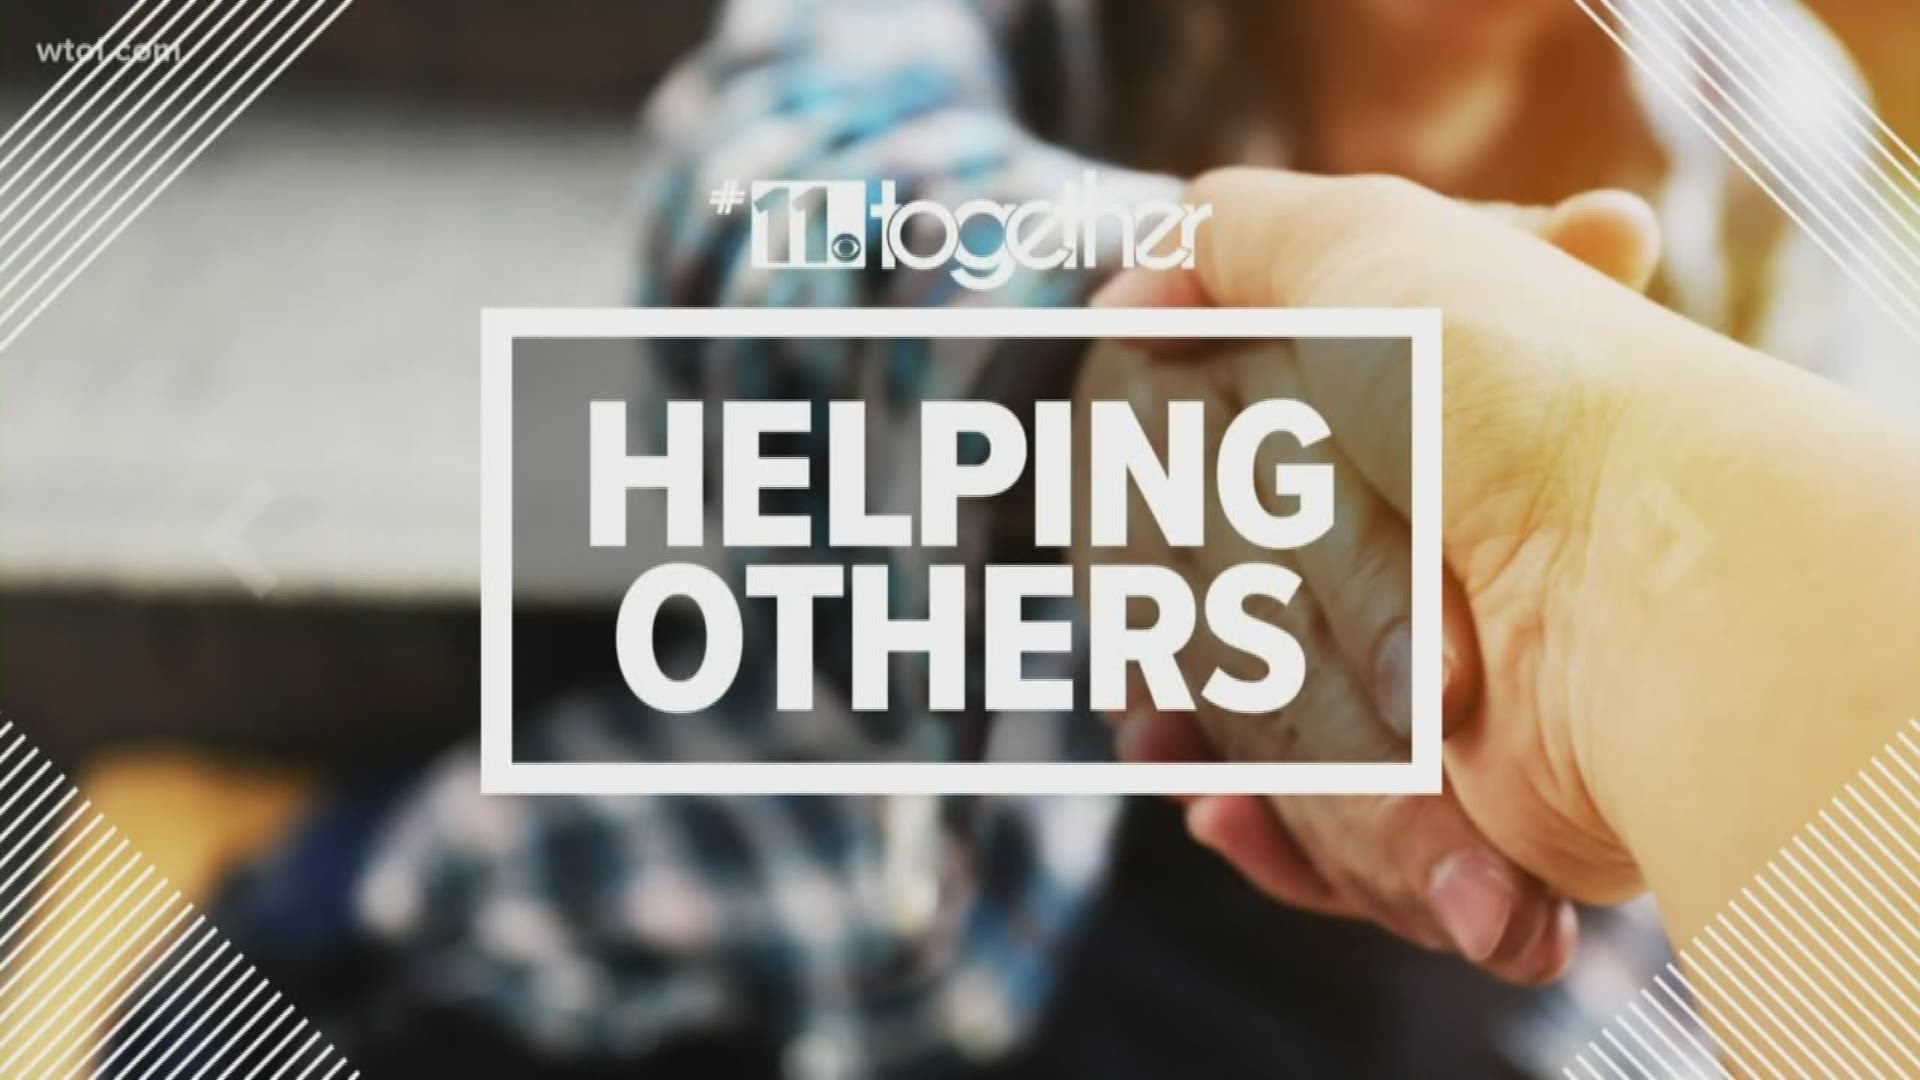 Highlighting the helpers, a local woman starts a Facebook group called Mutual Aid Toledo to assist those in need during the coronavirus outbreak.